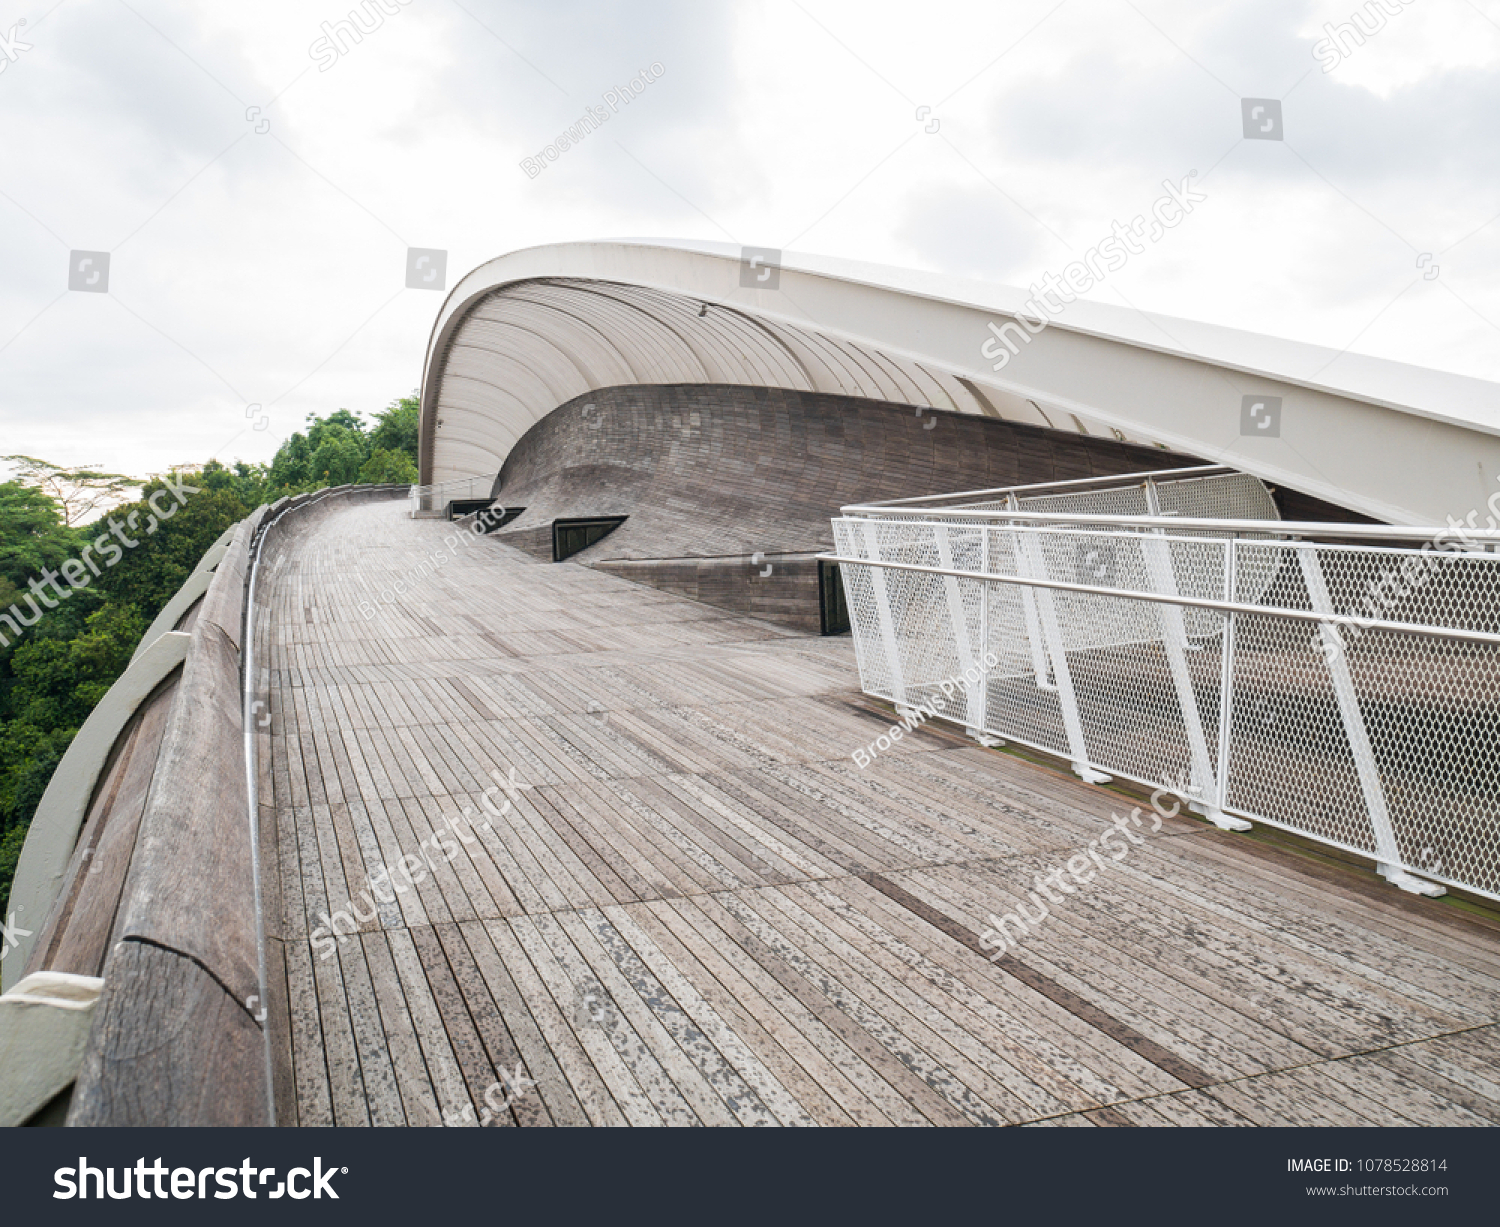 Henderson Waves Bridge Singapore with Undulating Curved Steel and Curved Wood Floor #1078528814